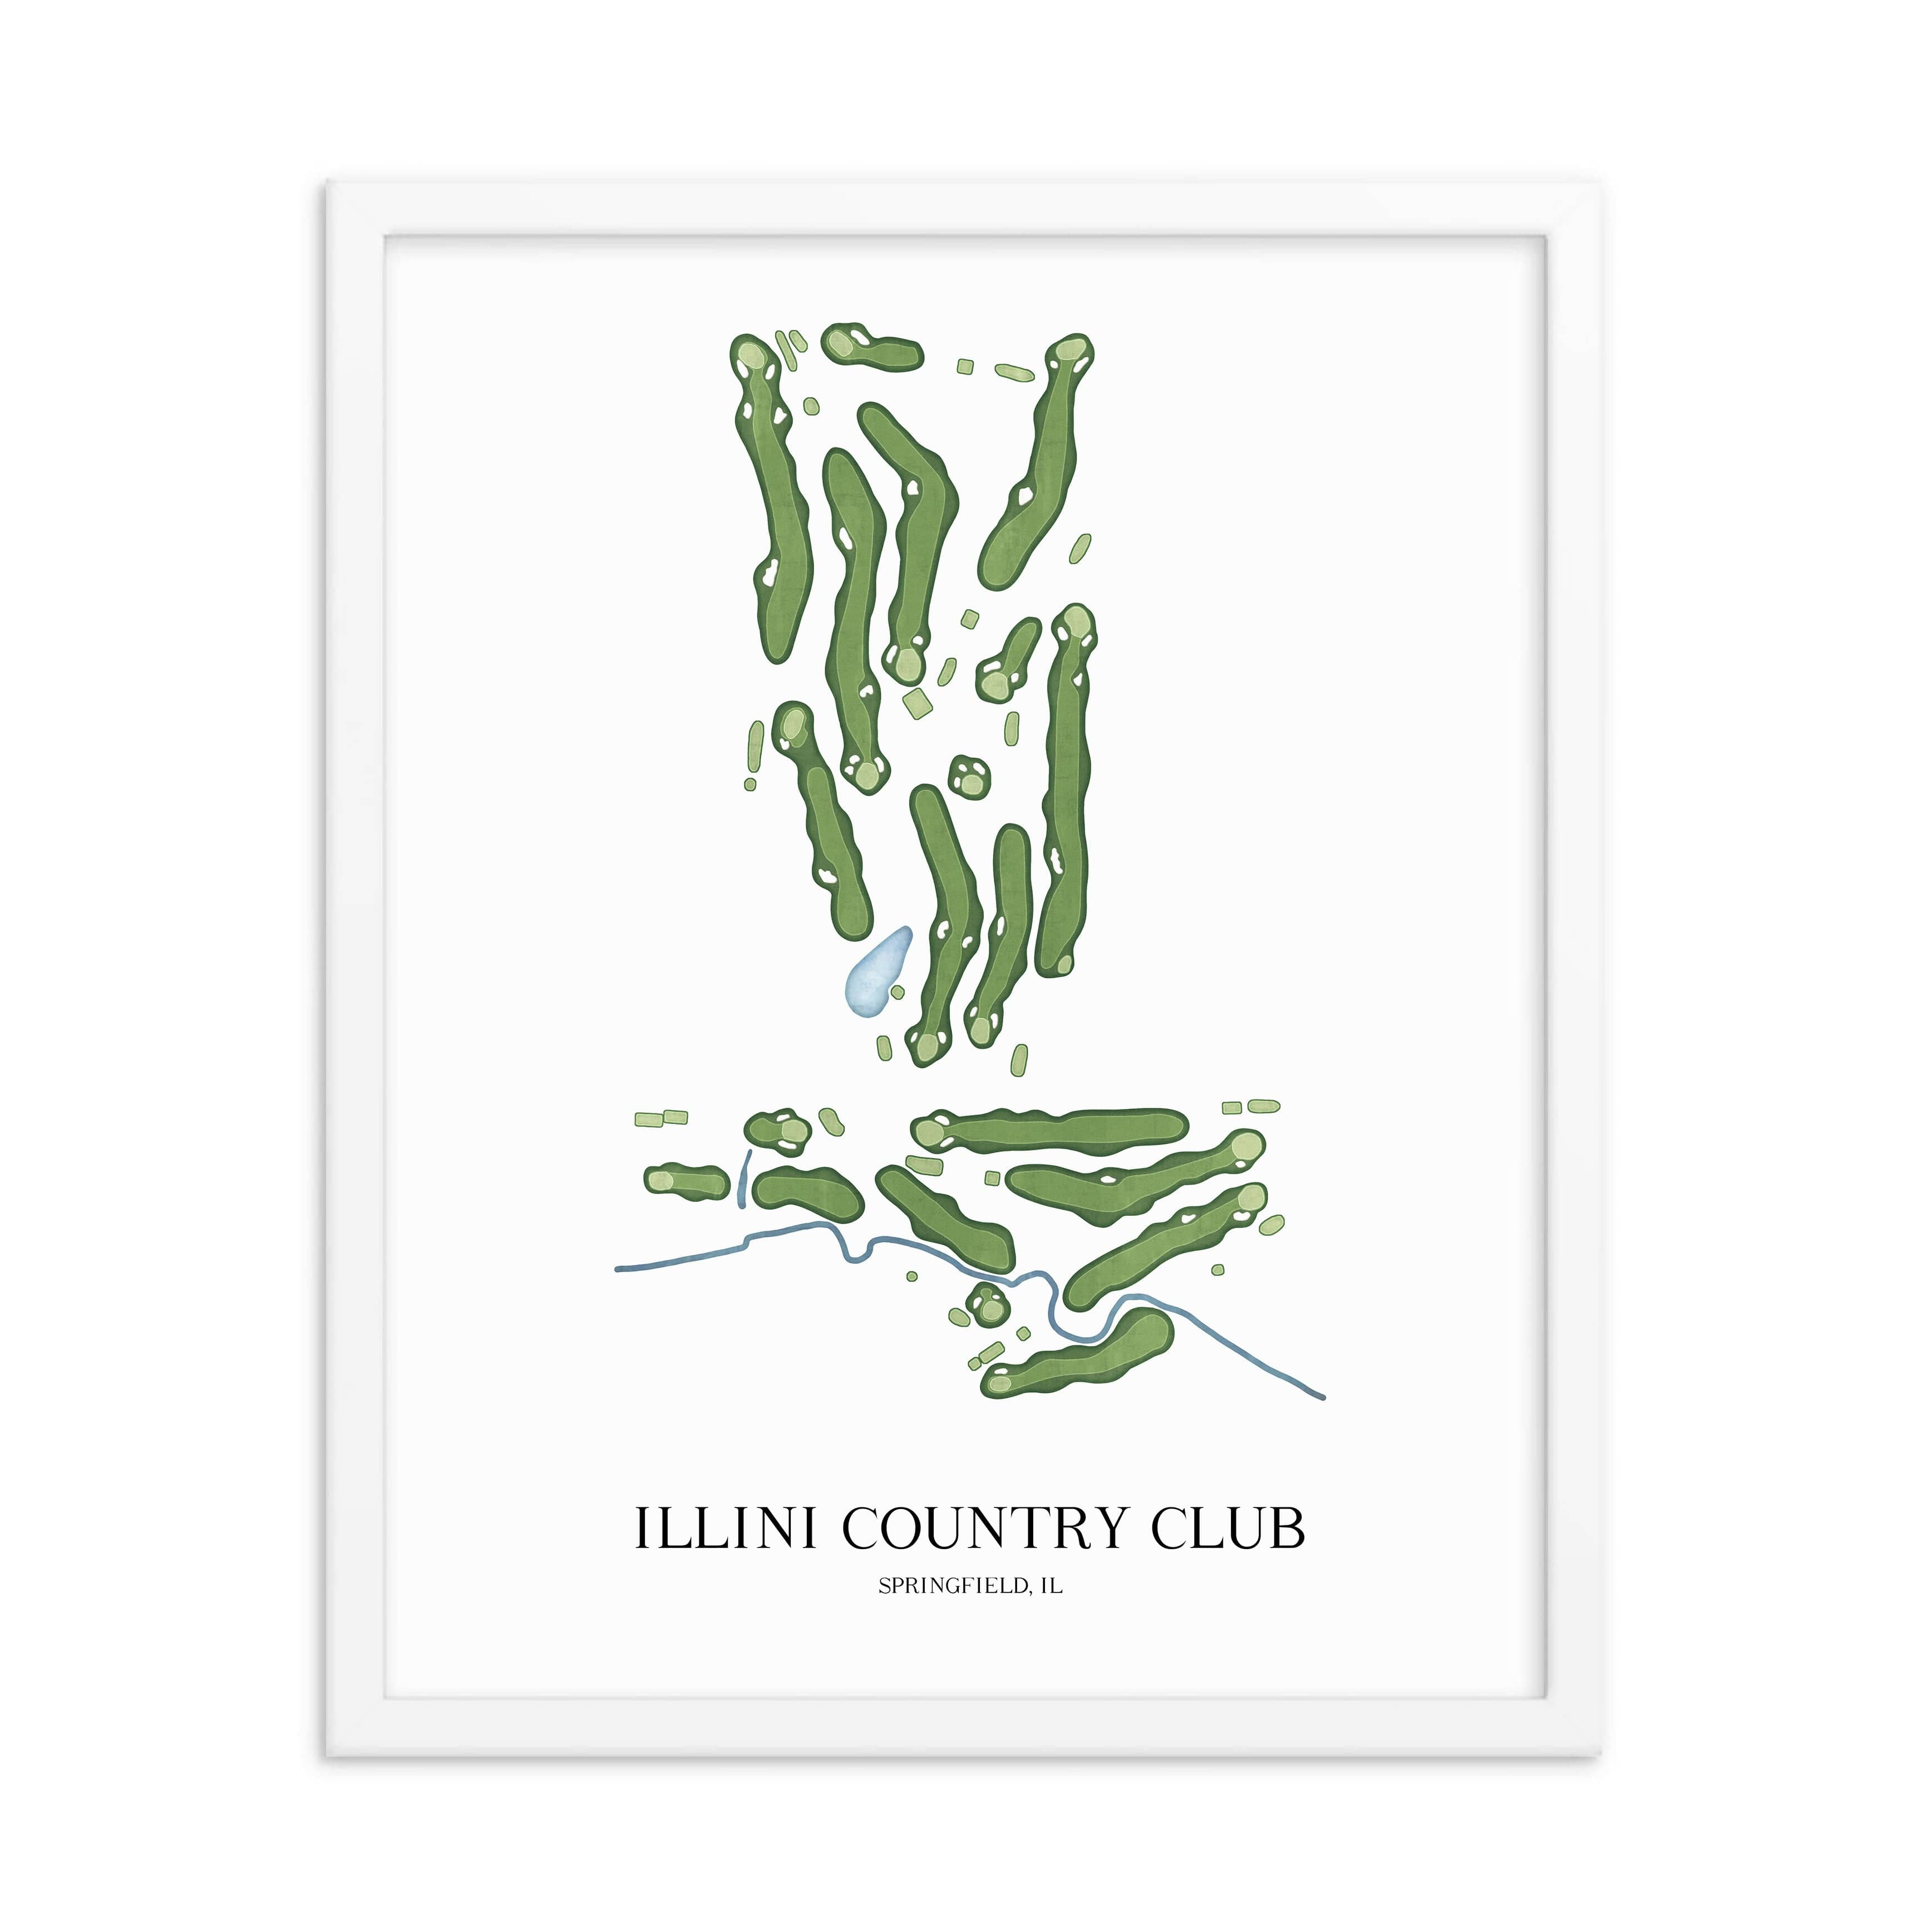 The 19th Hole Golf Shop - Golf Course Prints -  Illini Country Club Golf Course Map